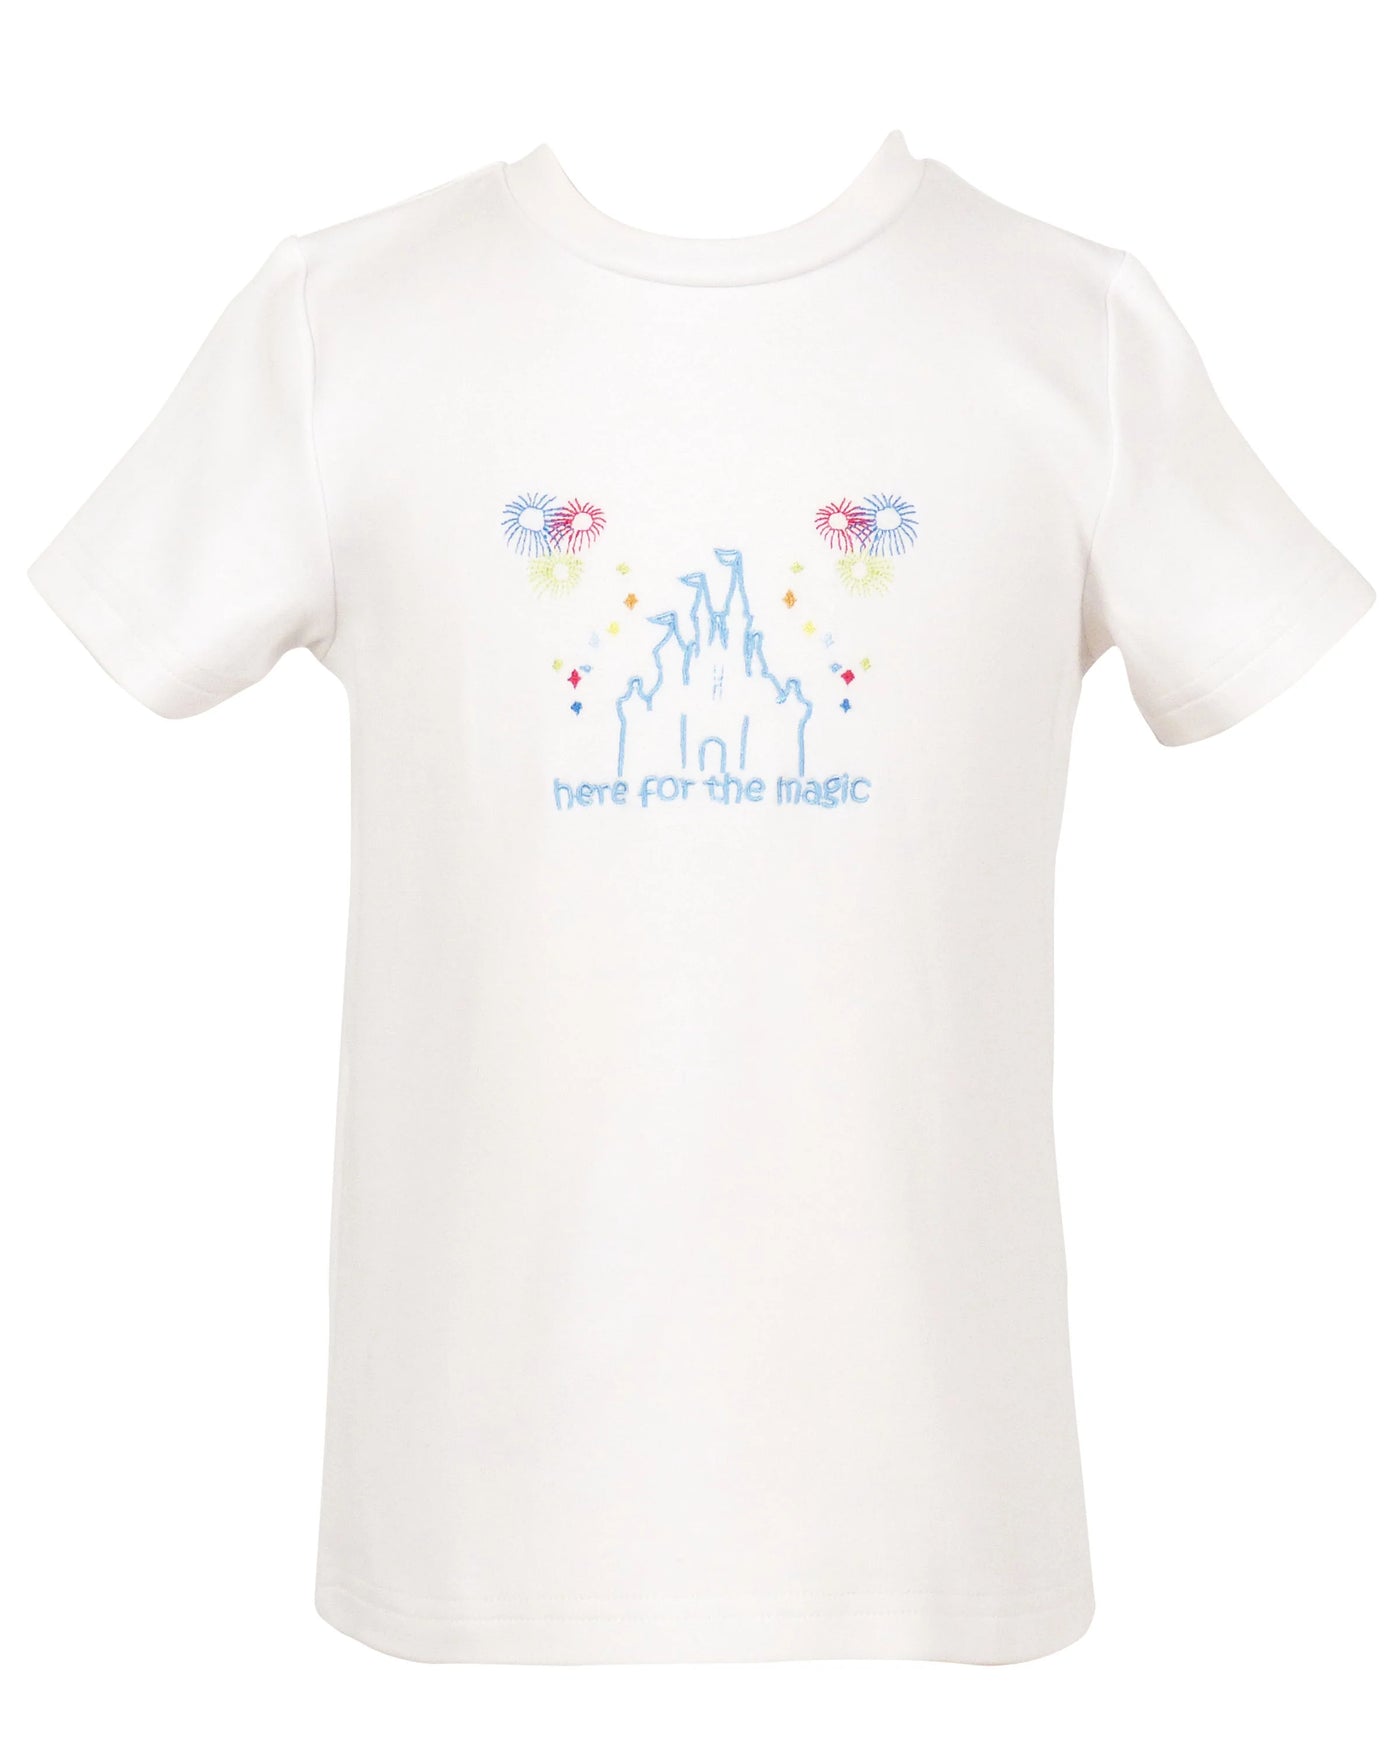 Here For the Magic Short Sleeved Tee - Breckenridge Baby